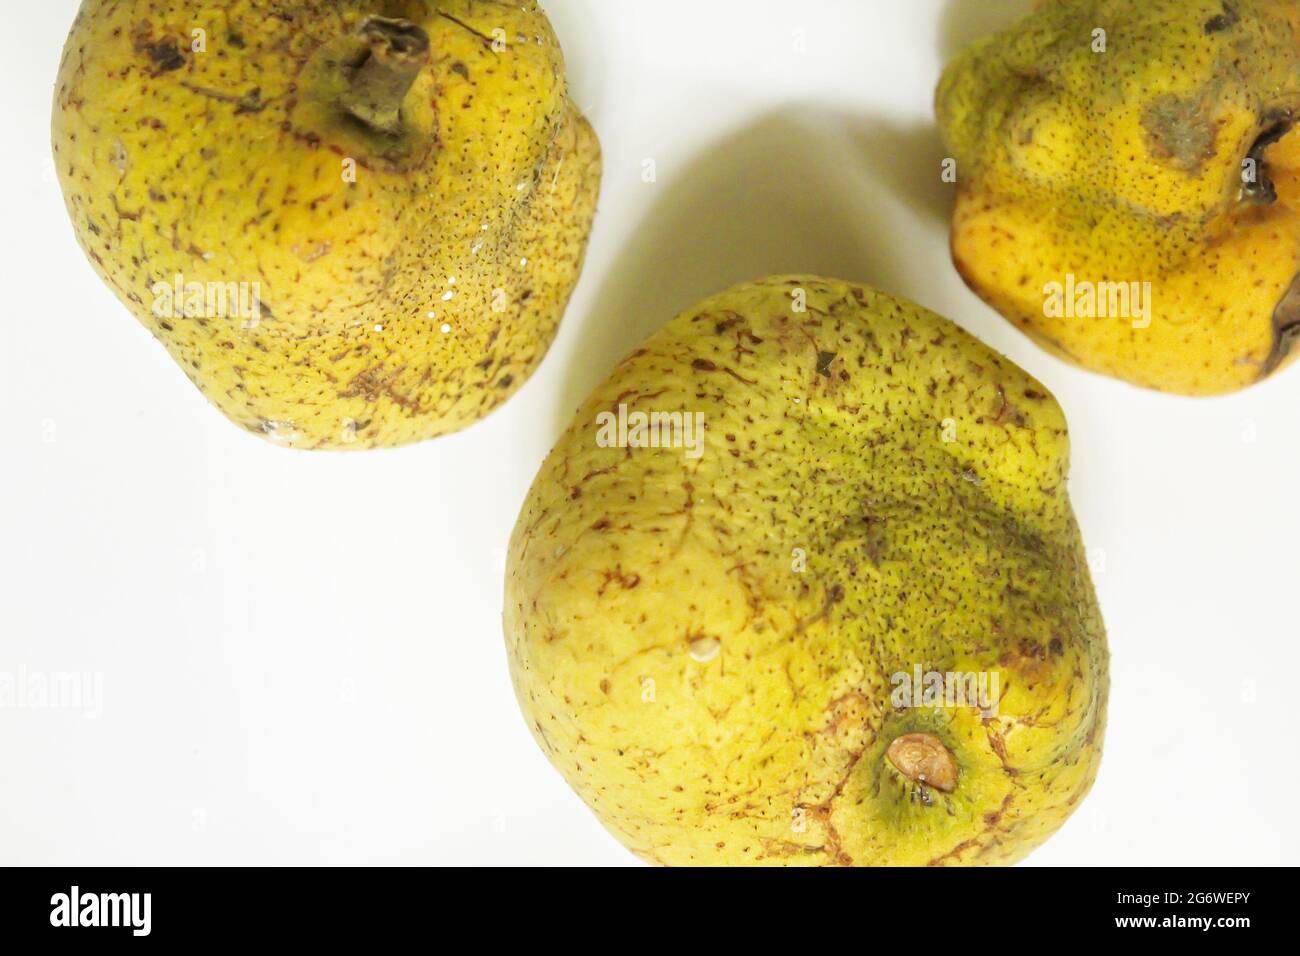 Artocarpus lacucha fruits on isolated white surface, top view Stock Photo